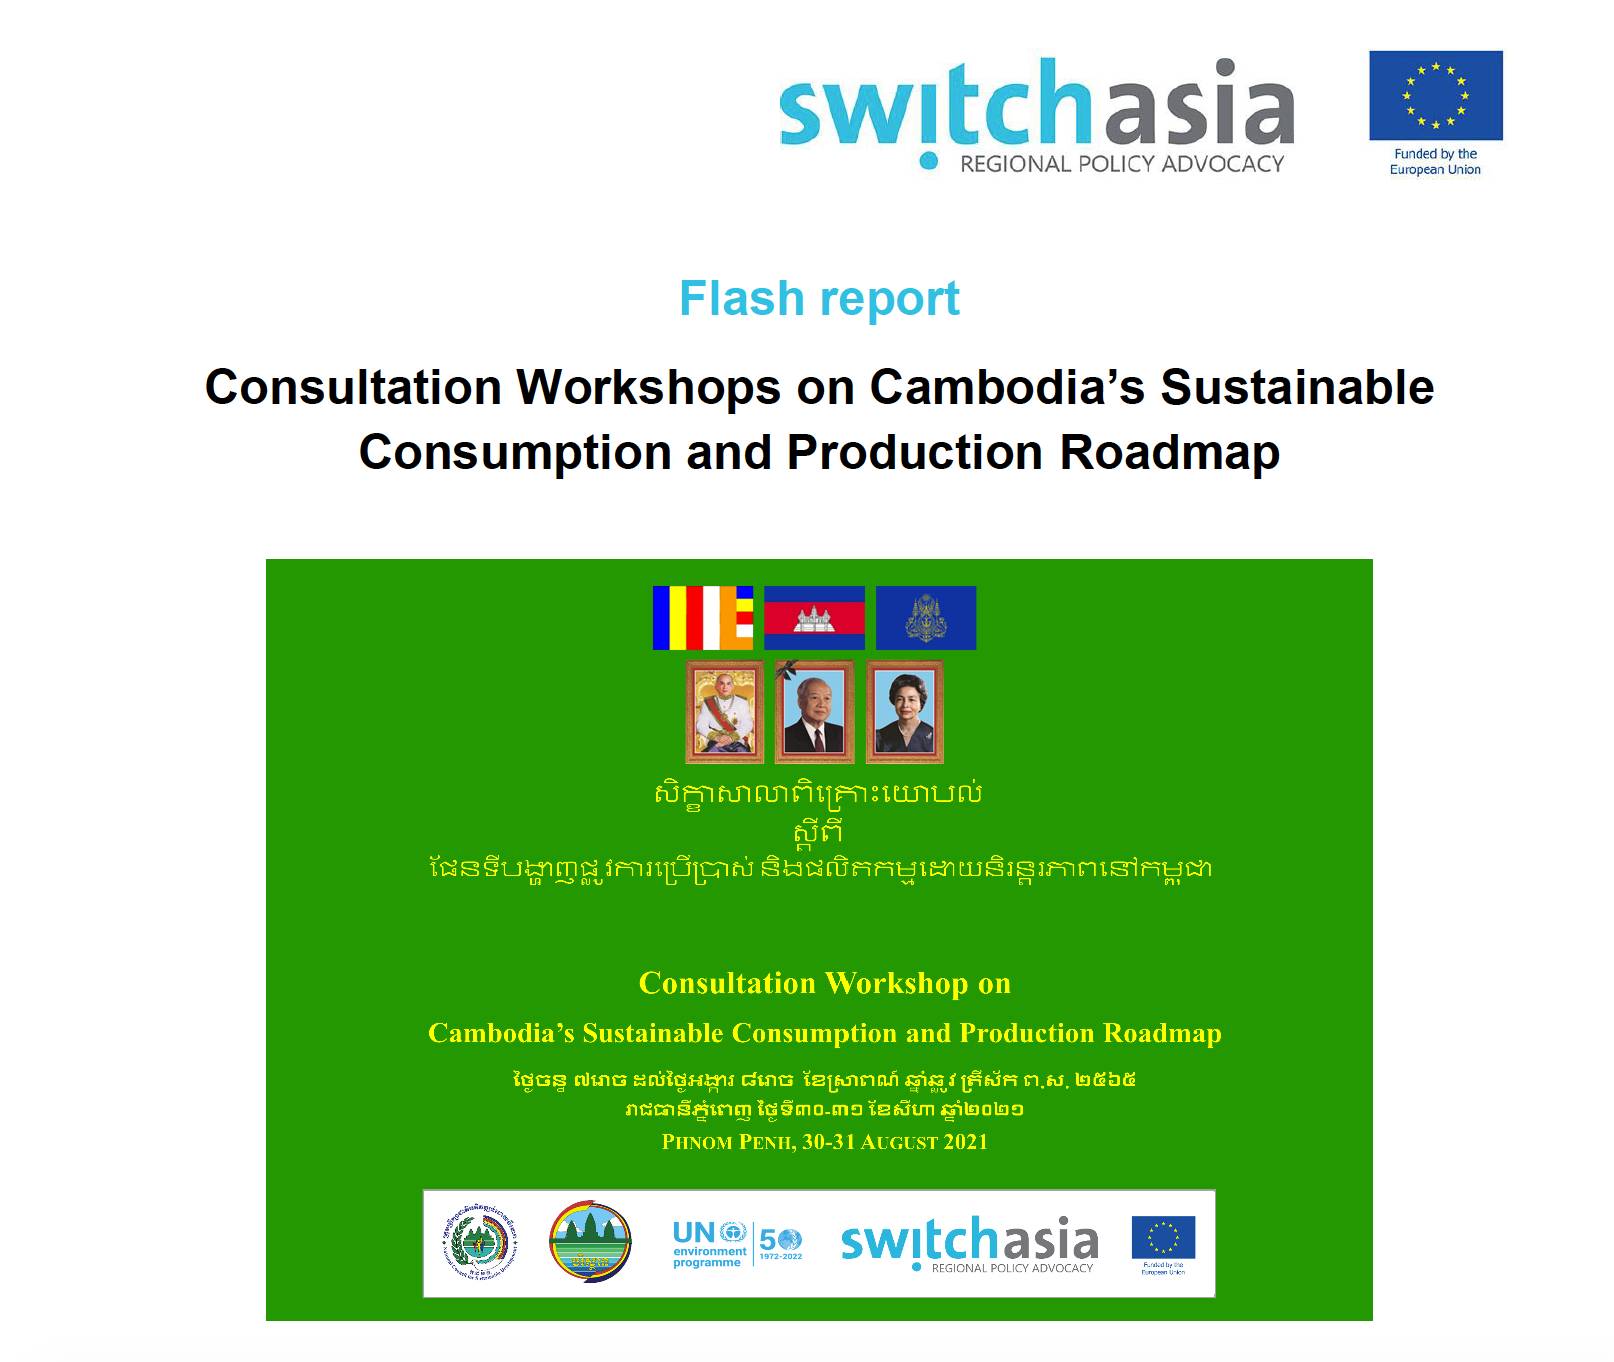 Consultation Workshops on Cambodia’s Sustainable Consumption and Production Roadmap